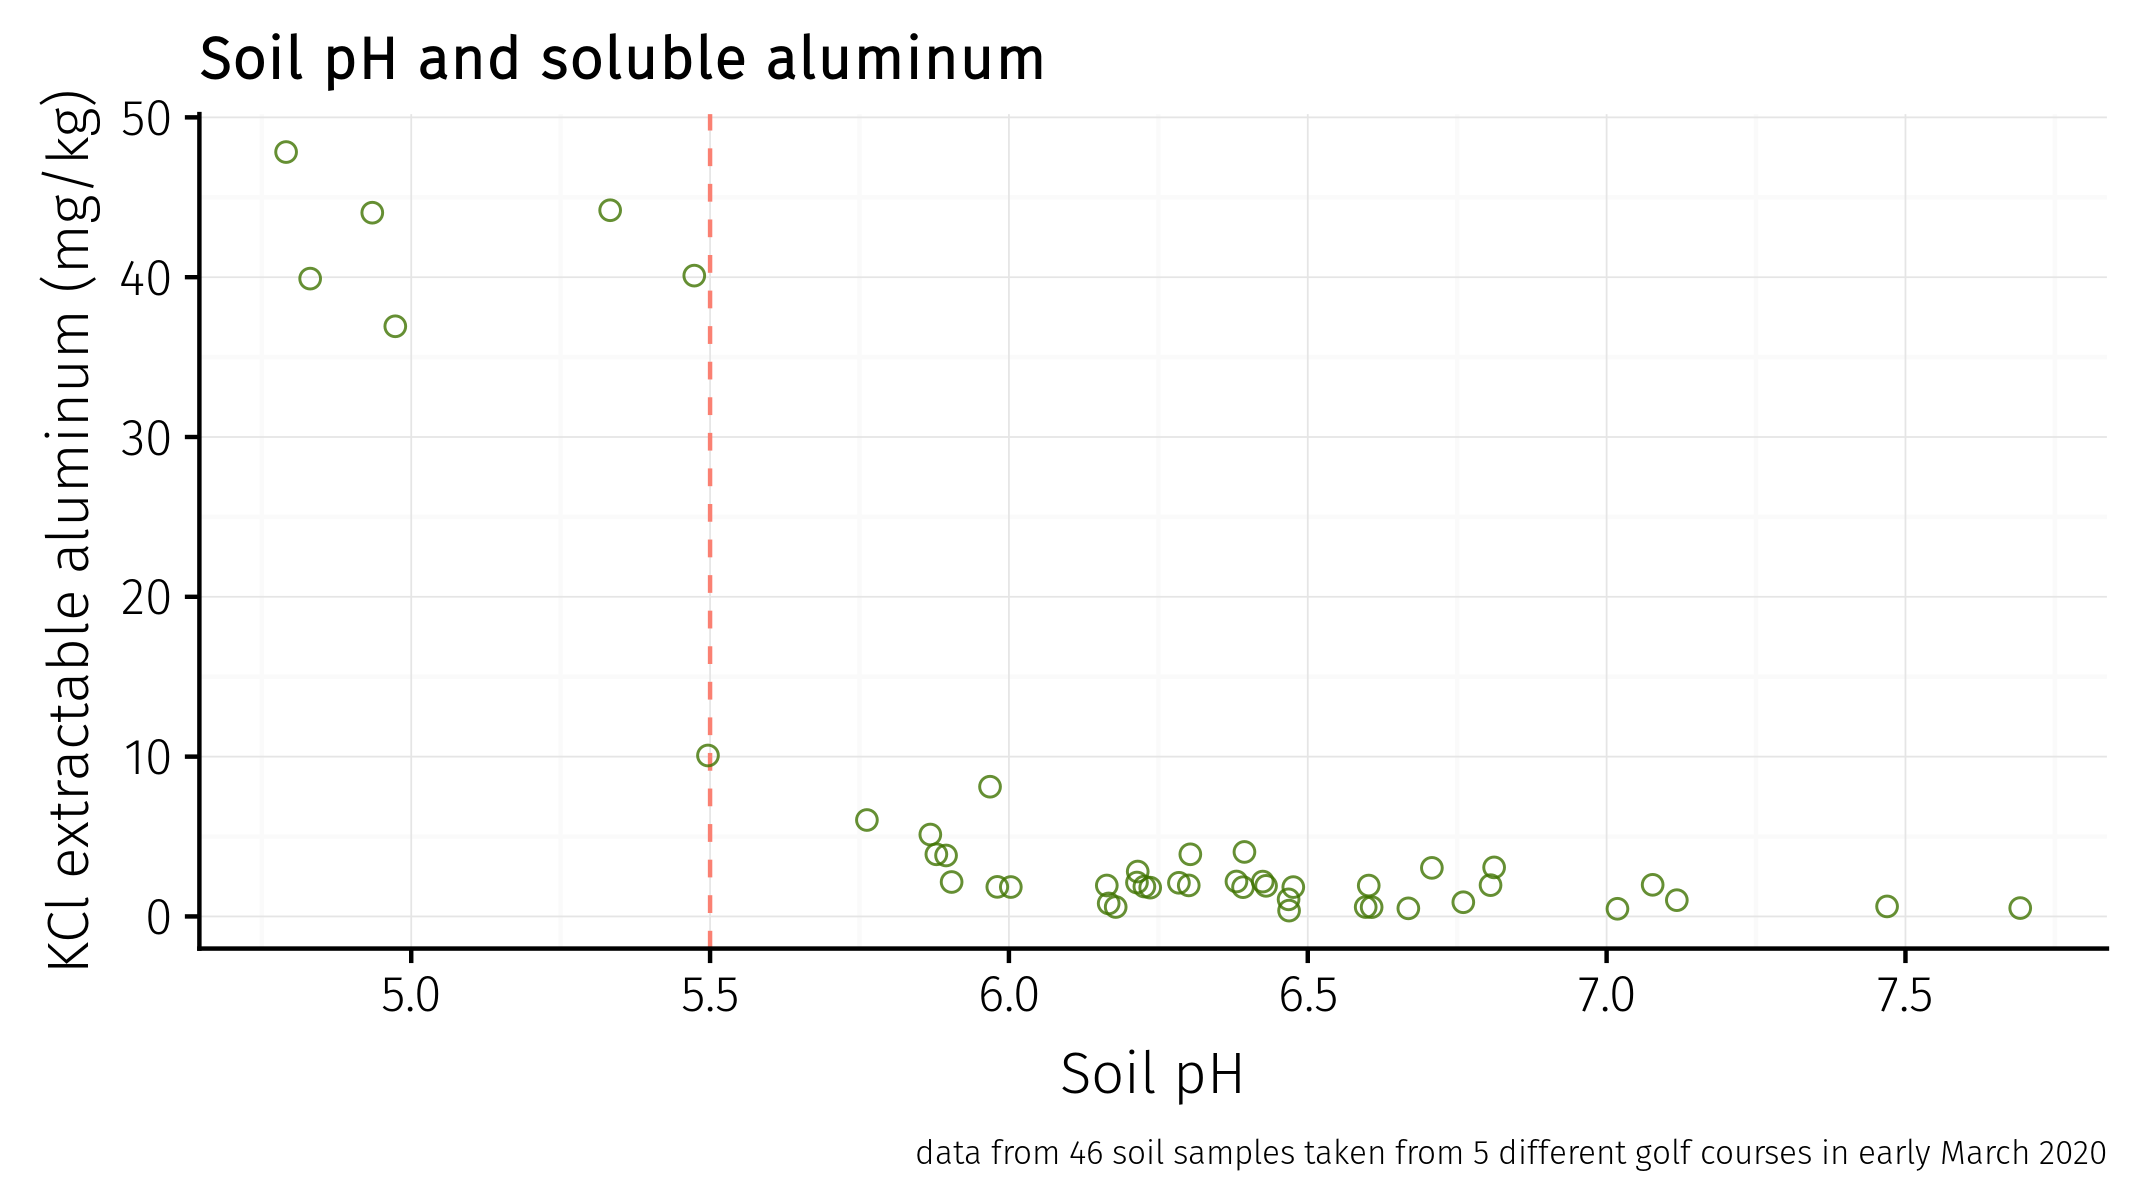 plot of soluble aluminum going down when soil pH is above 5.5